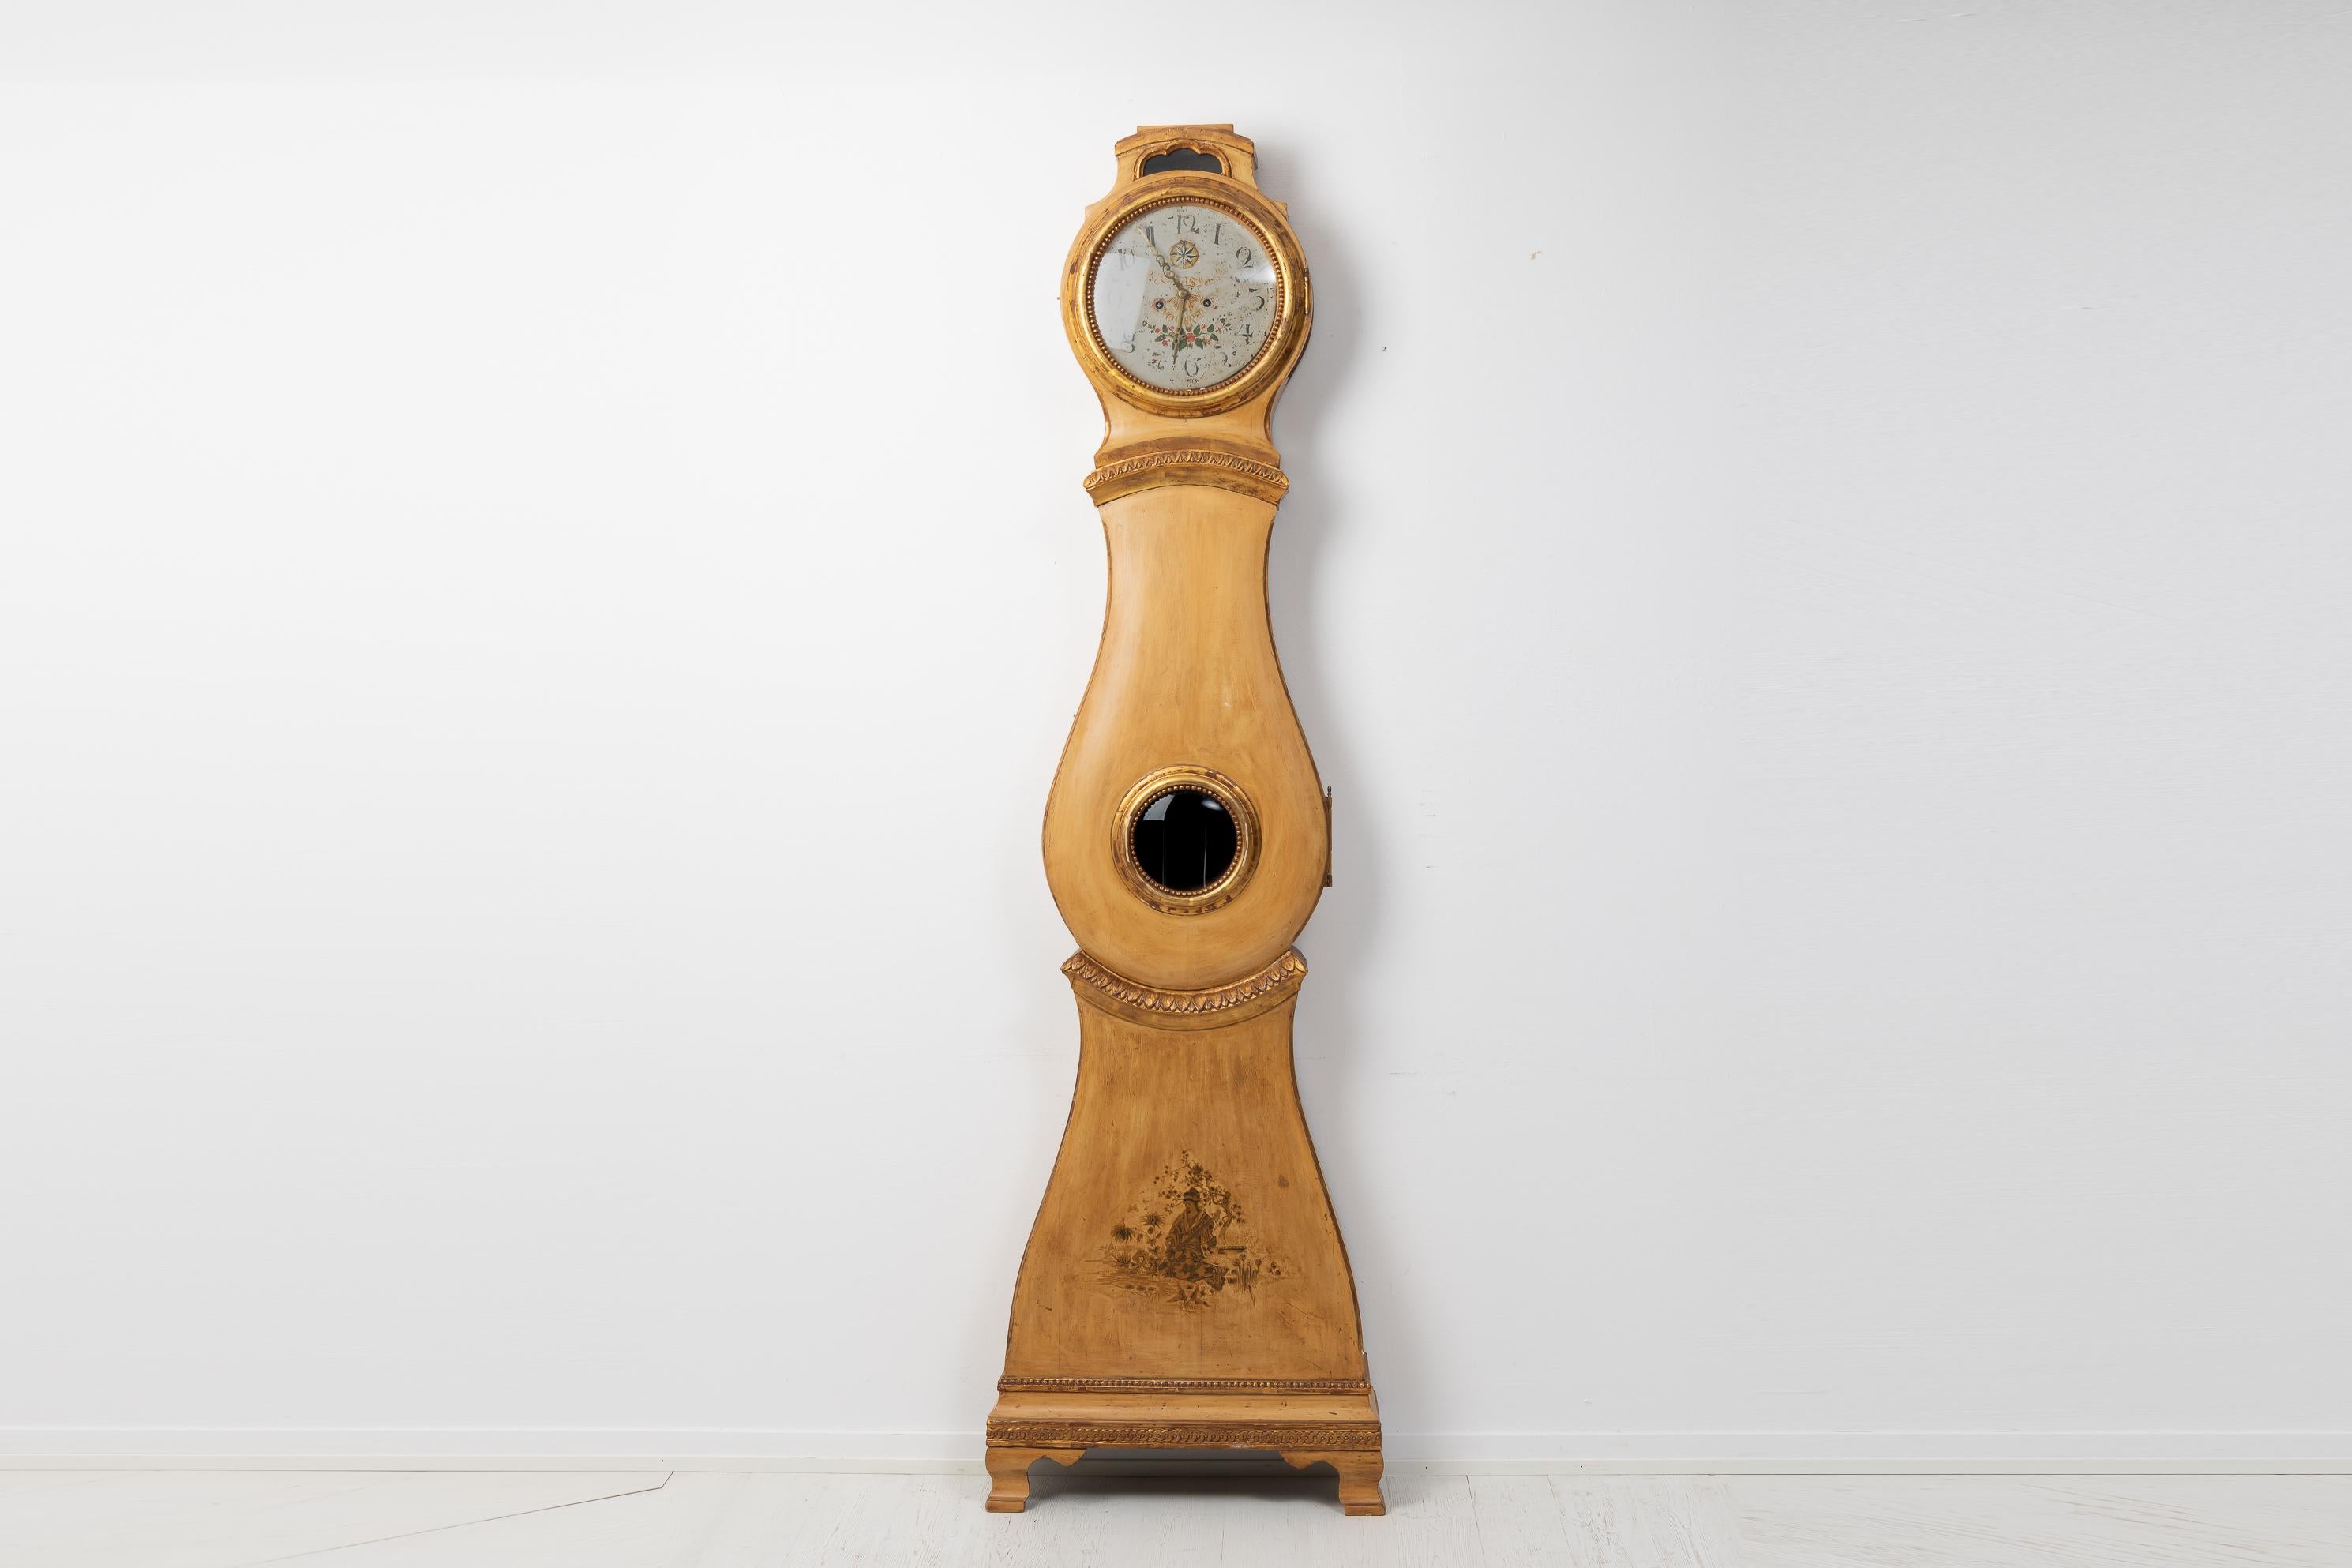 Antique gustavian long case clock in painted pine from Sweden. The clock has a hand carved decor in wood with older paint from the late 1800s. The paint has become slightly distressed with time which gives the clock an extra air of character. The